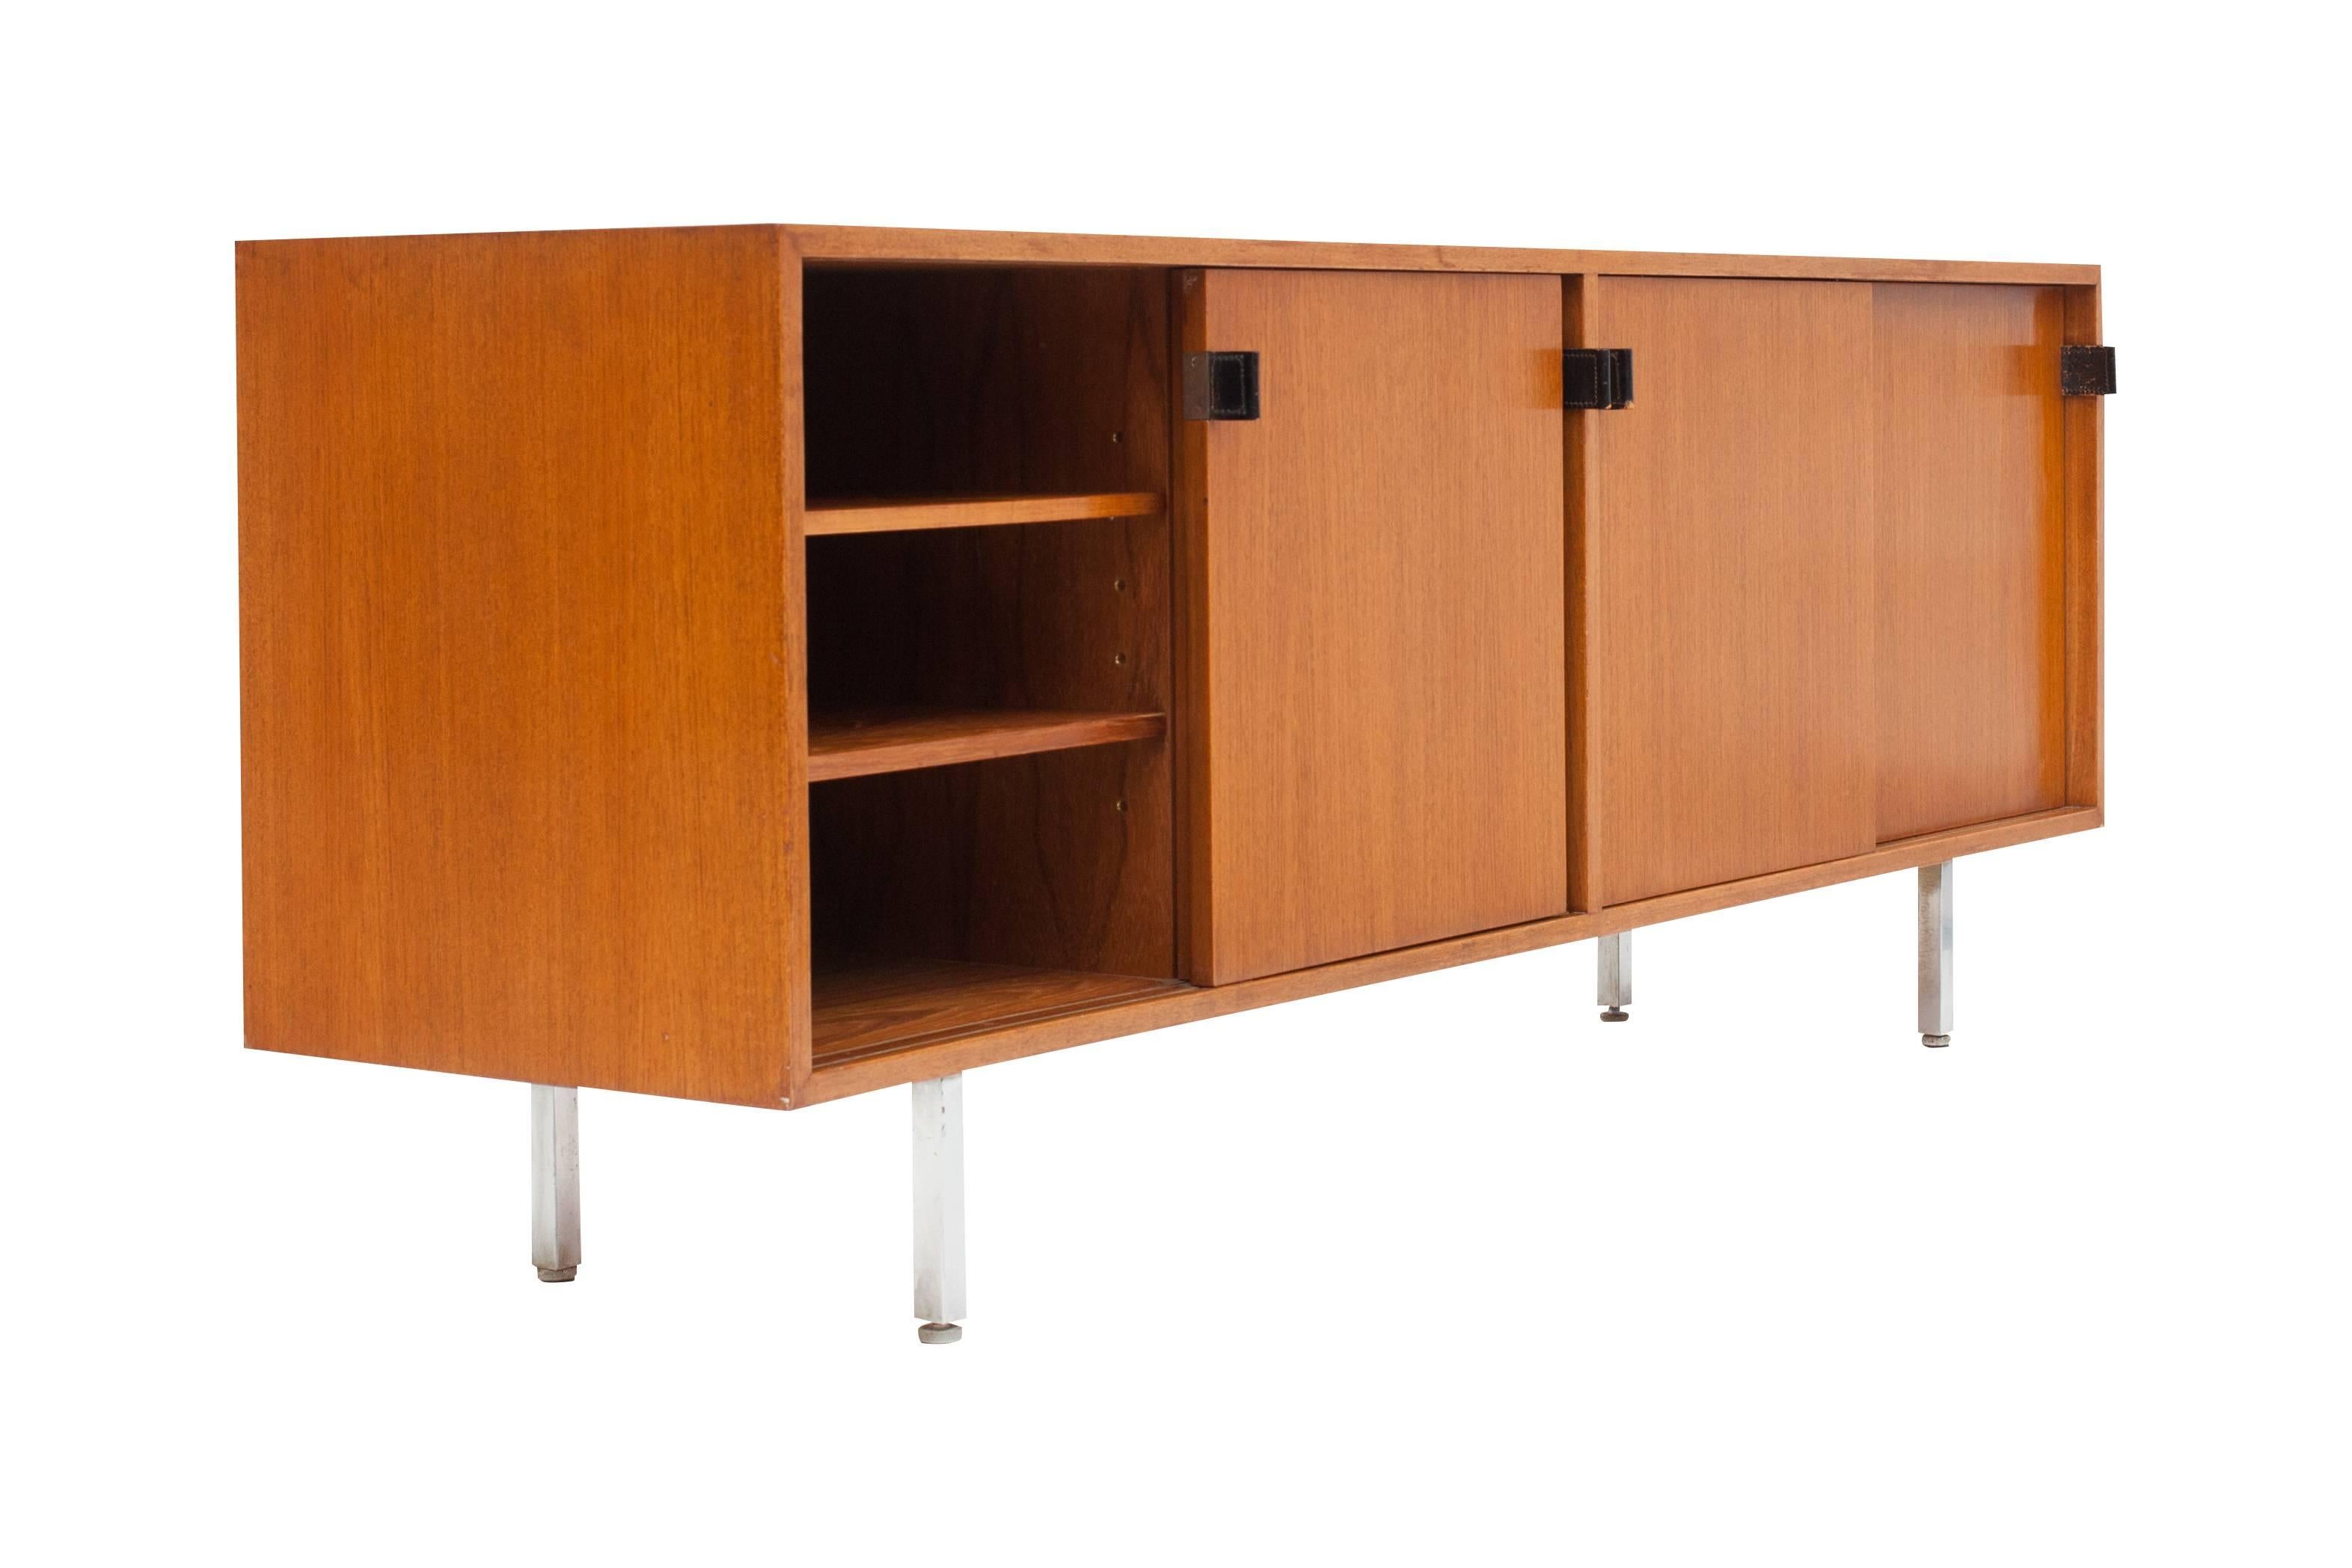 Chrome Florence Knoll Credenza in Teak , Manufactured by De Coene, 1950s